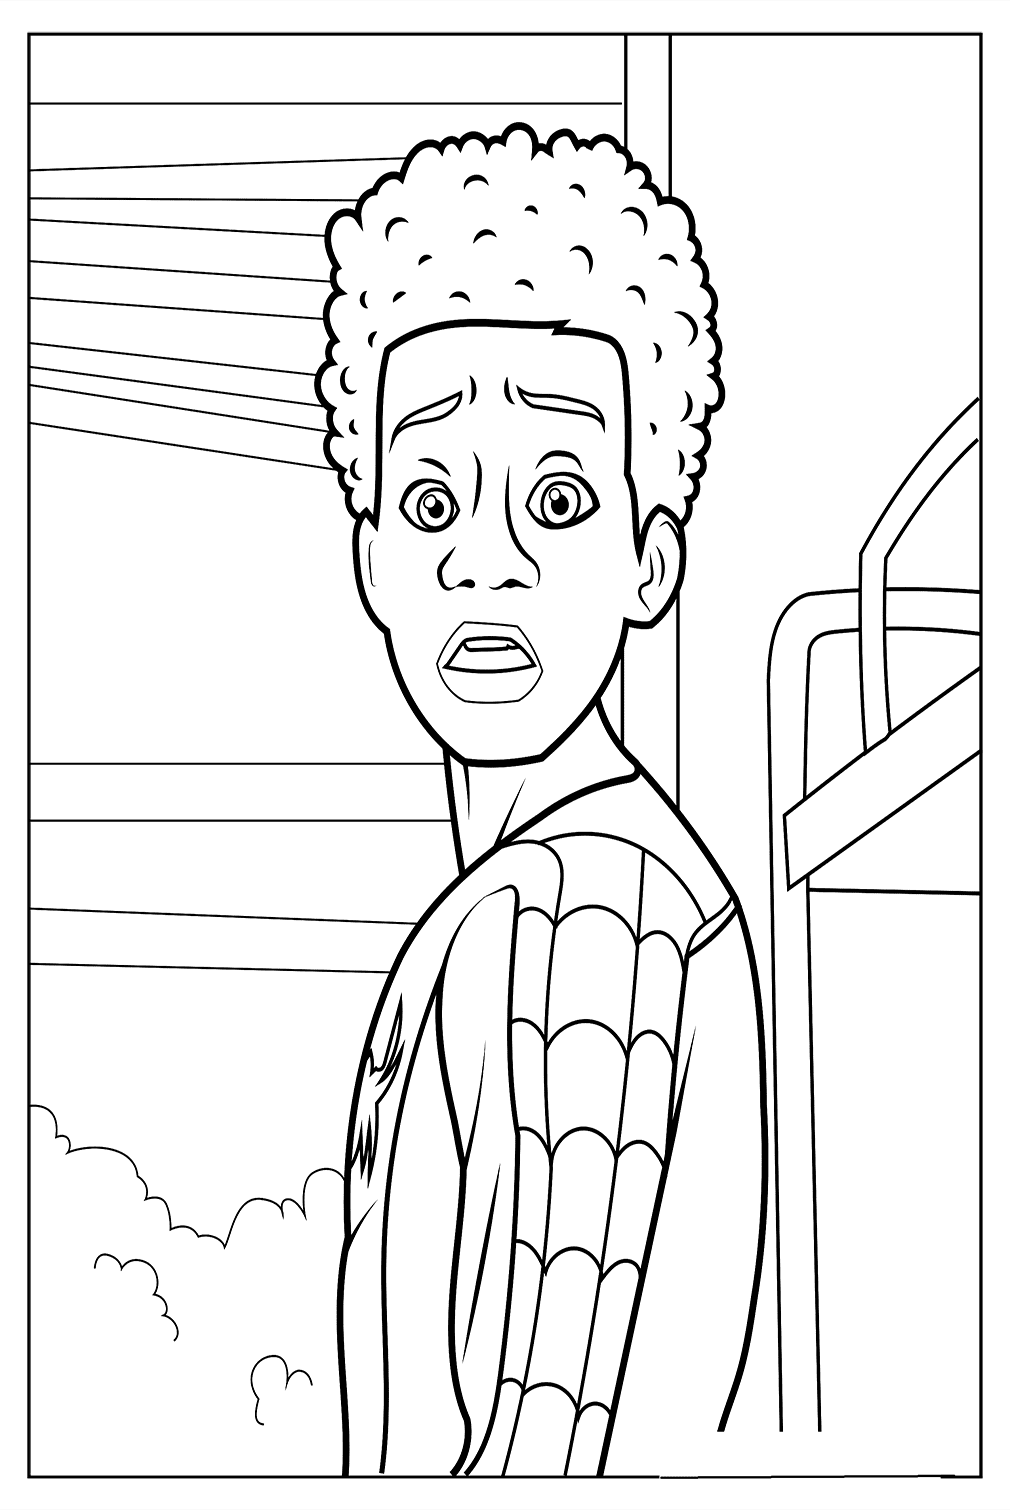 Real Spider-man Across The Spider Coloring Page from Spider-Man: Across the Spider